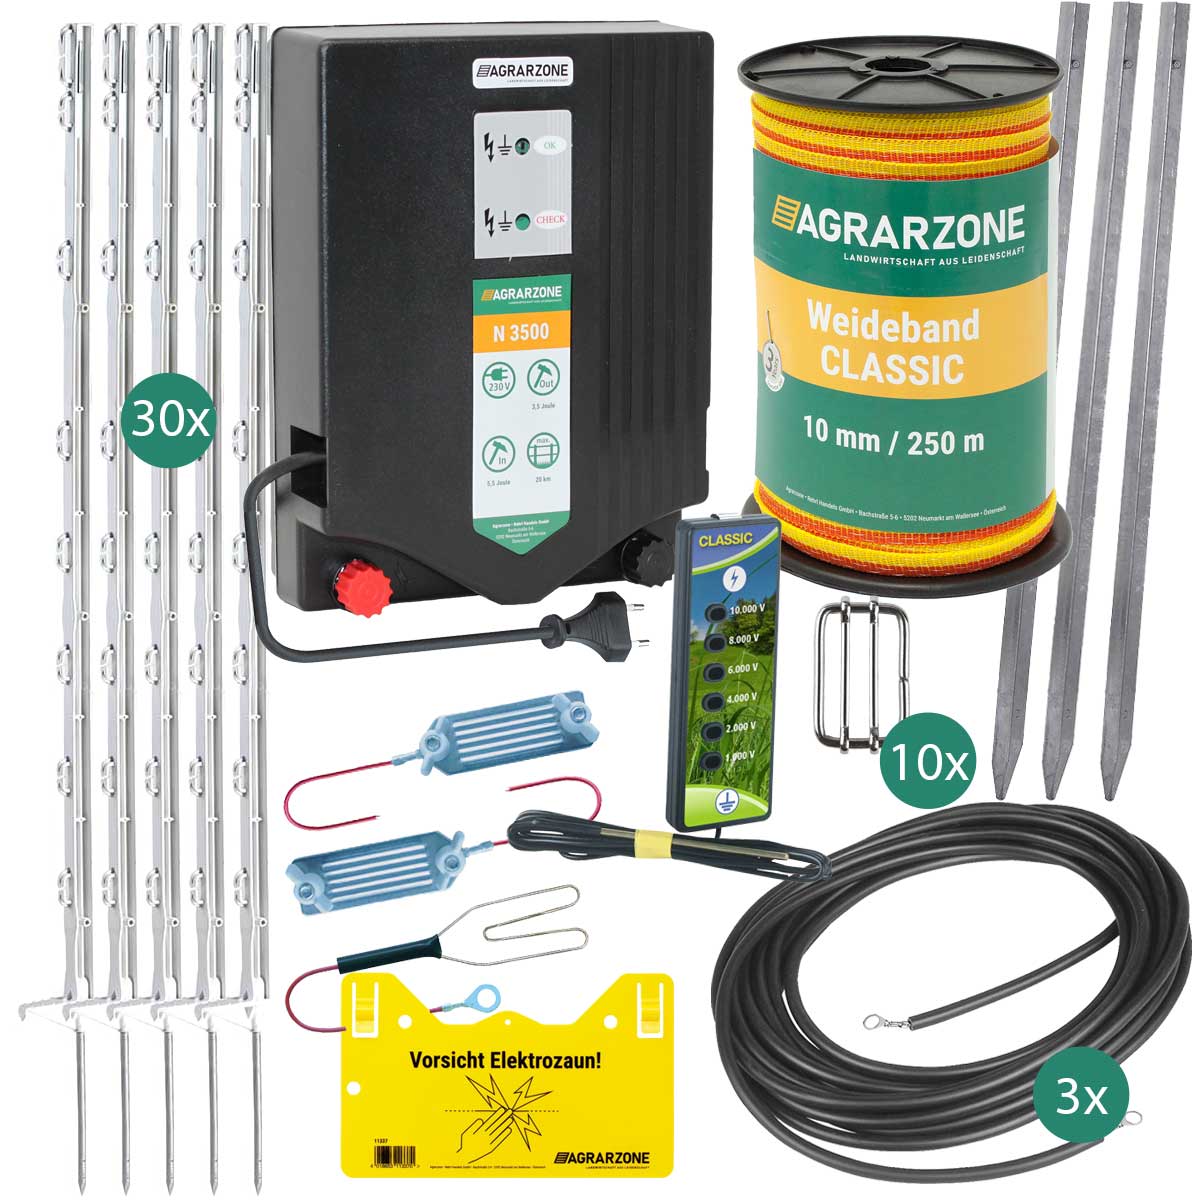 Agrarzone deer fence Complete electric fence for garden security